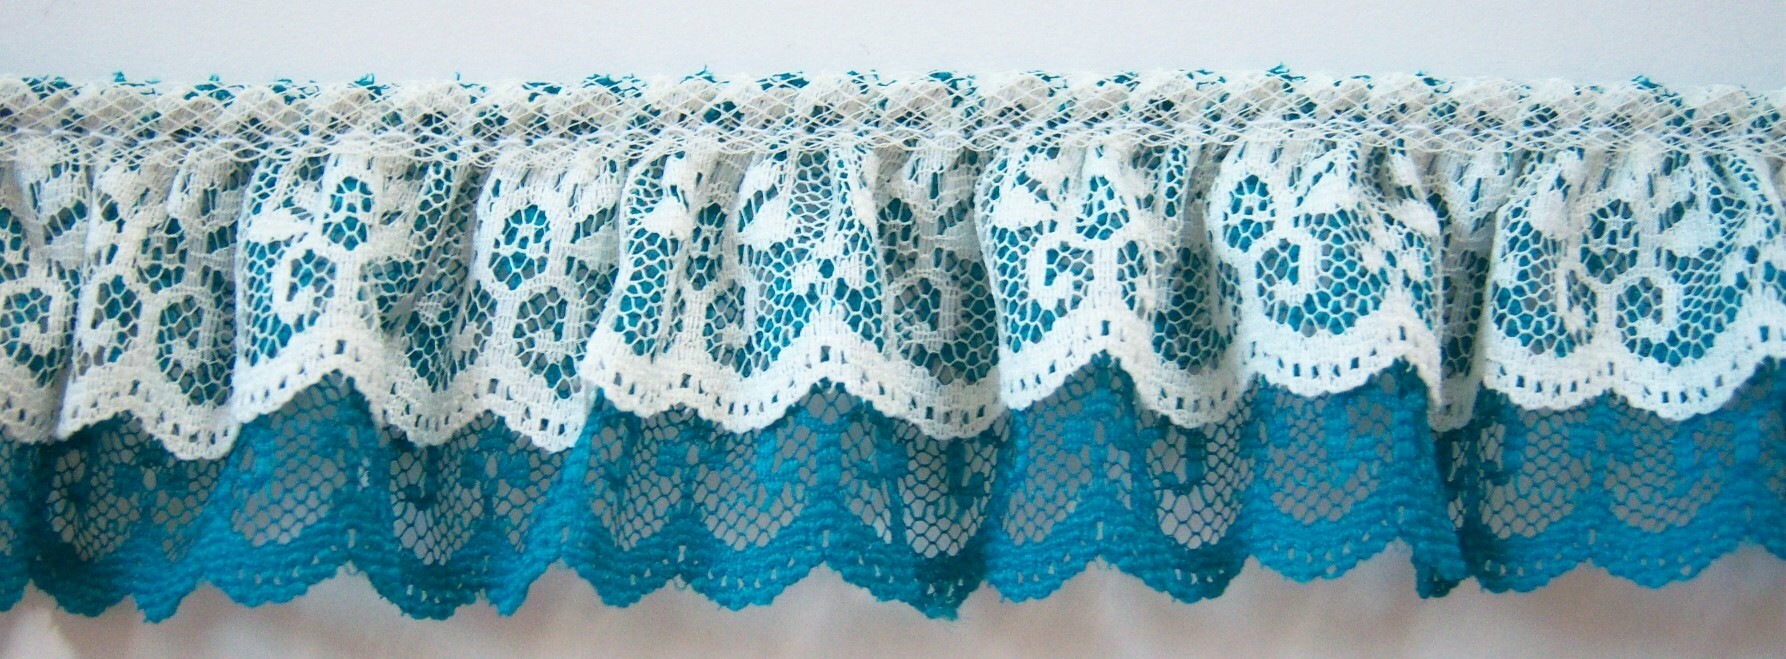 Ivory/Teal Double Gathered Lace